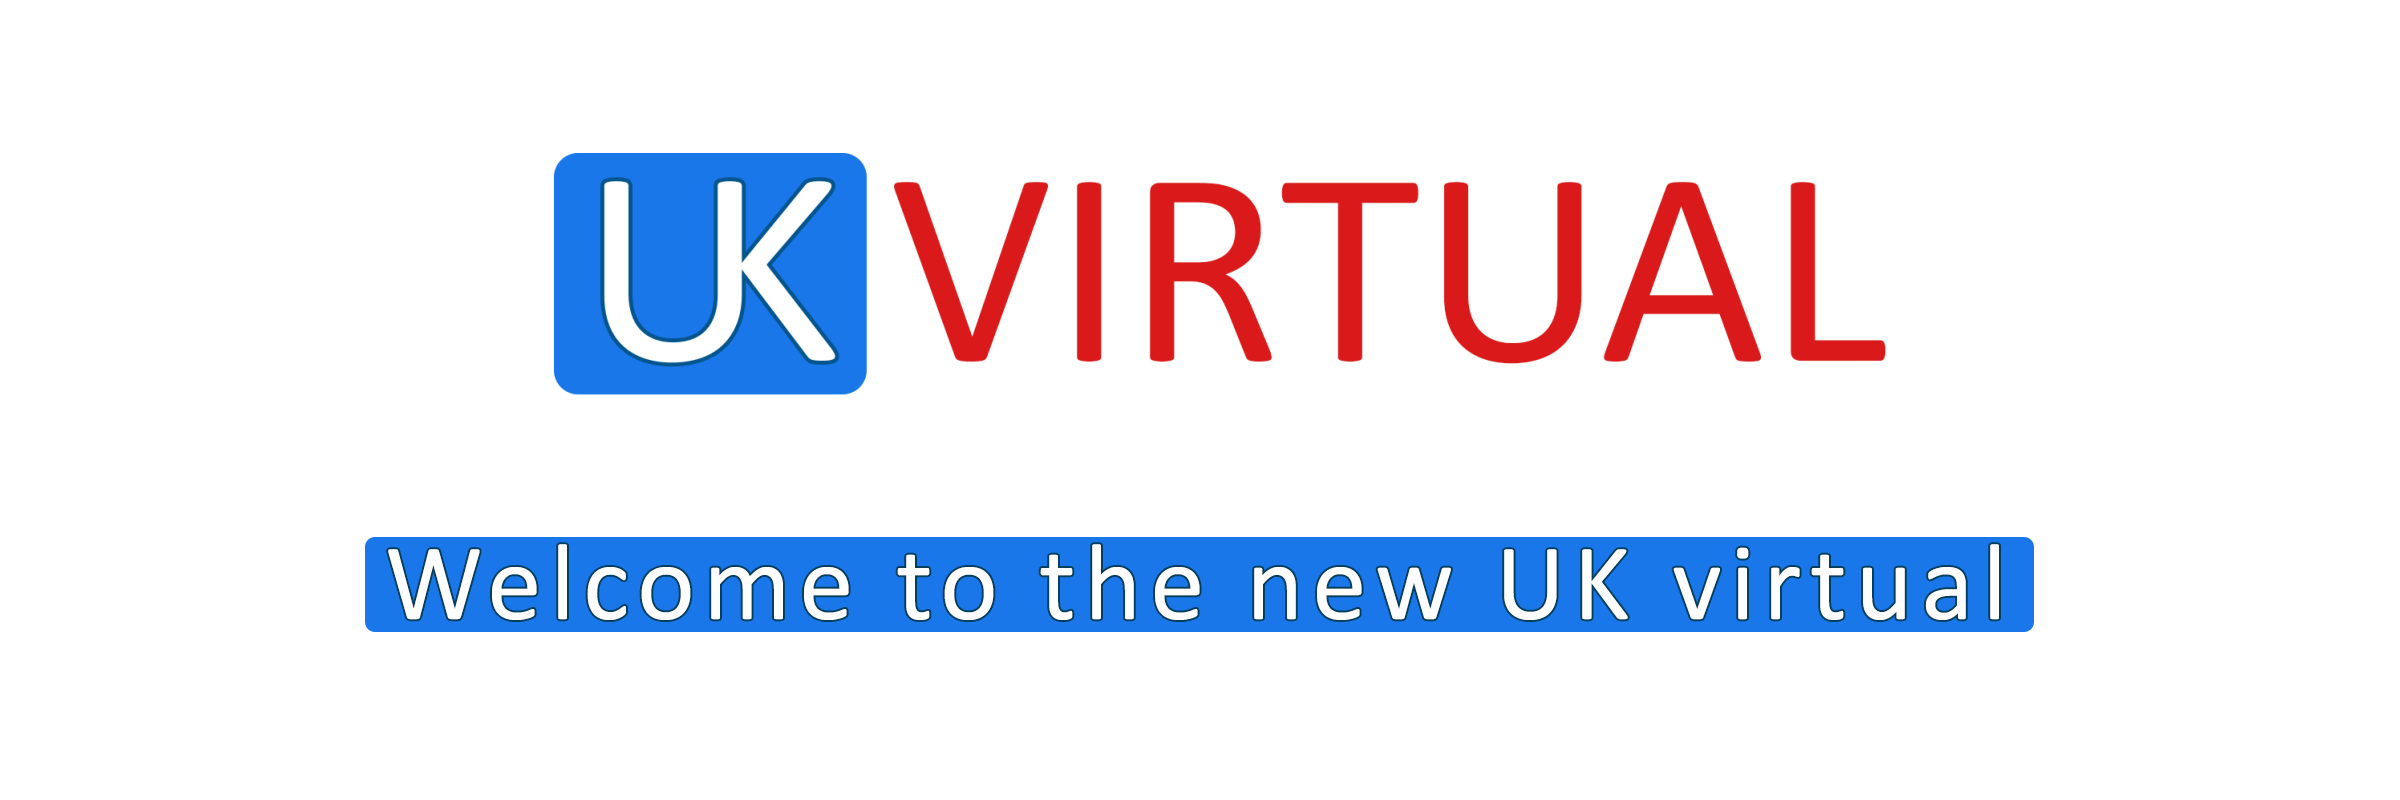 Welcome to the new UK virtual